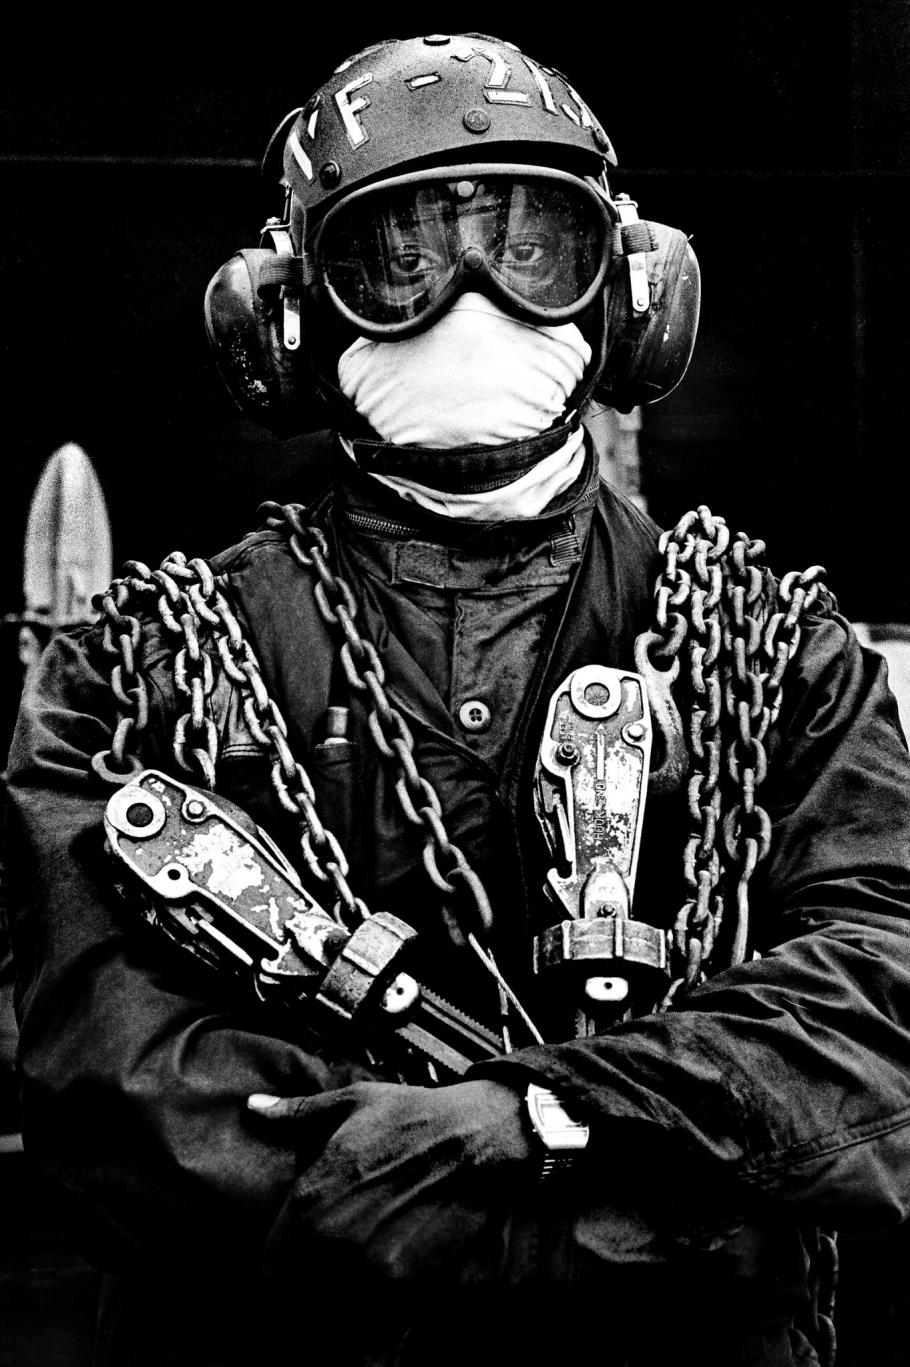 Person with a helmet, goggles, and face covering with chains hanging from their shoulders.